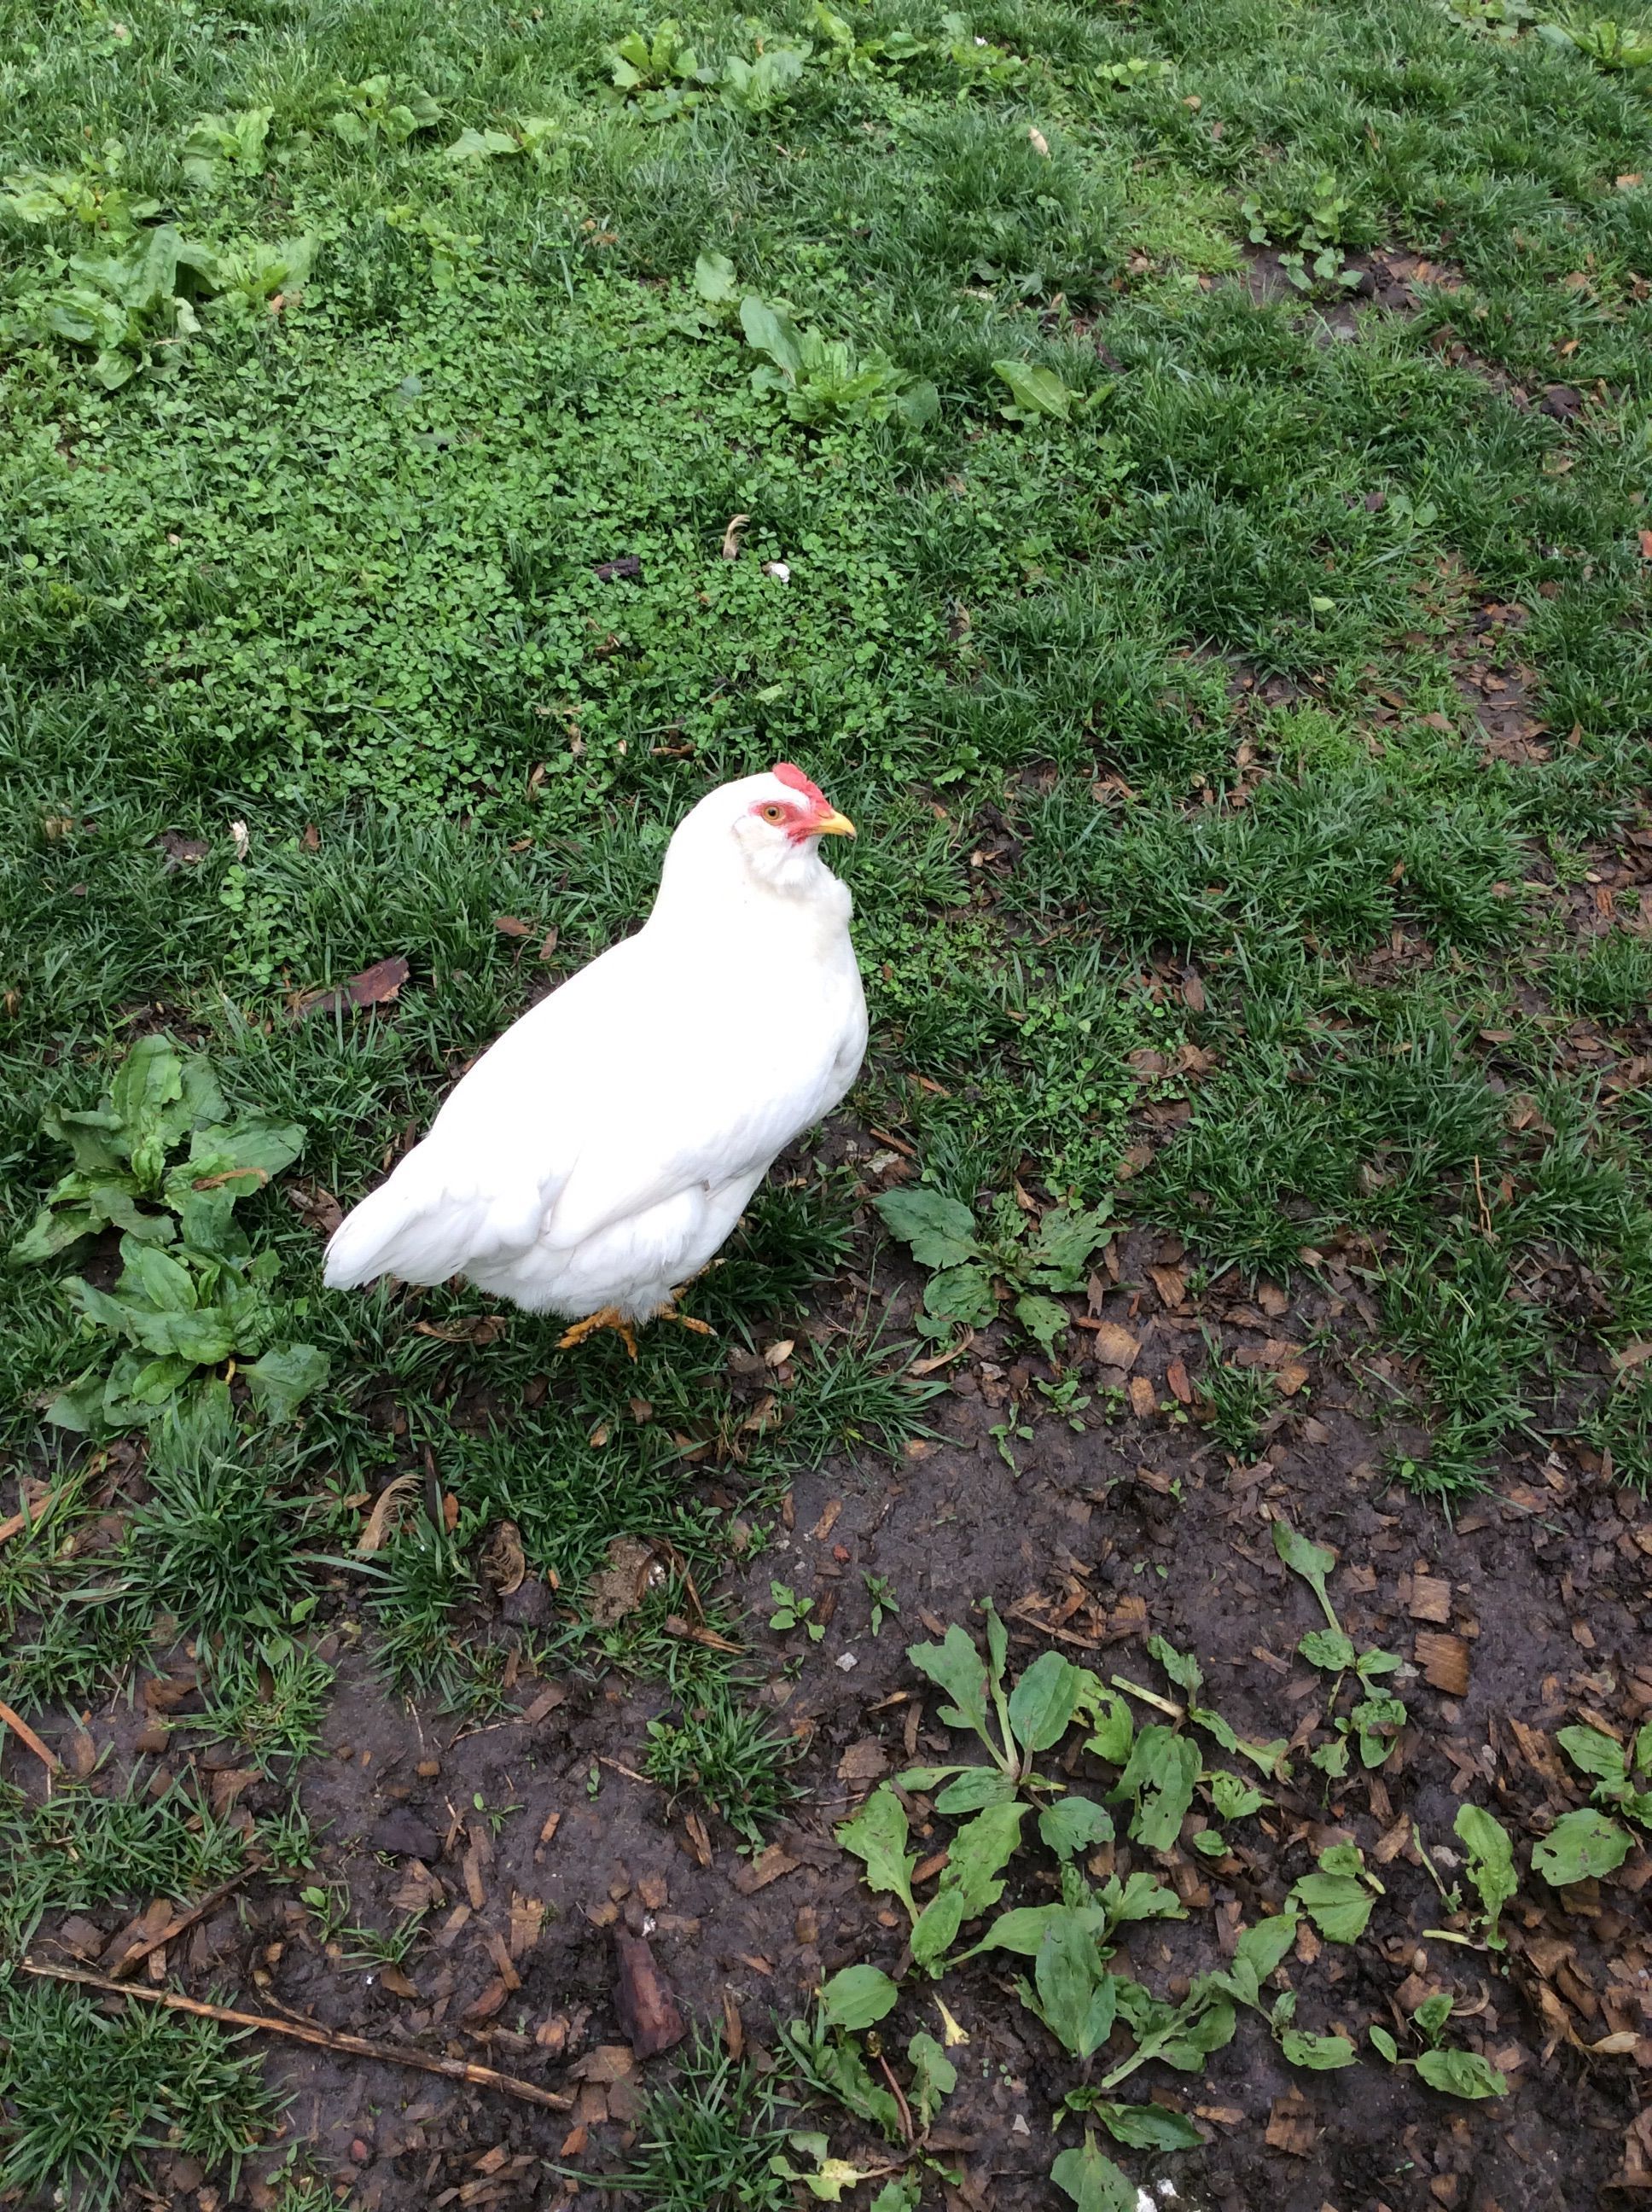 My leghorn EE. She is such a nice little chicken and lays a real pretty blue egg every single day.